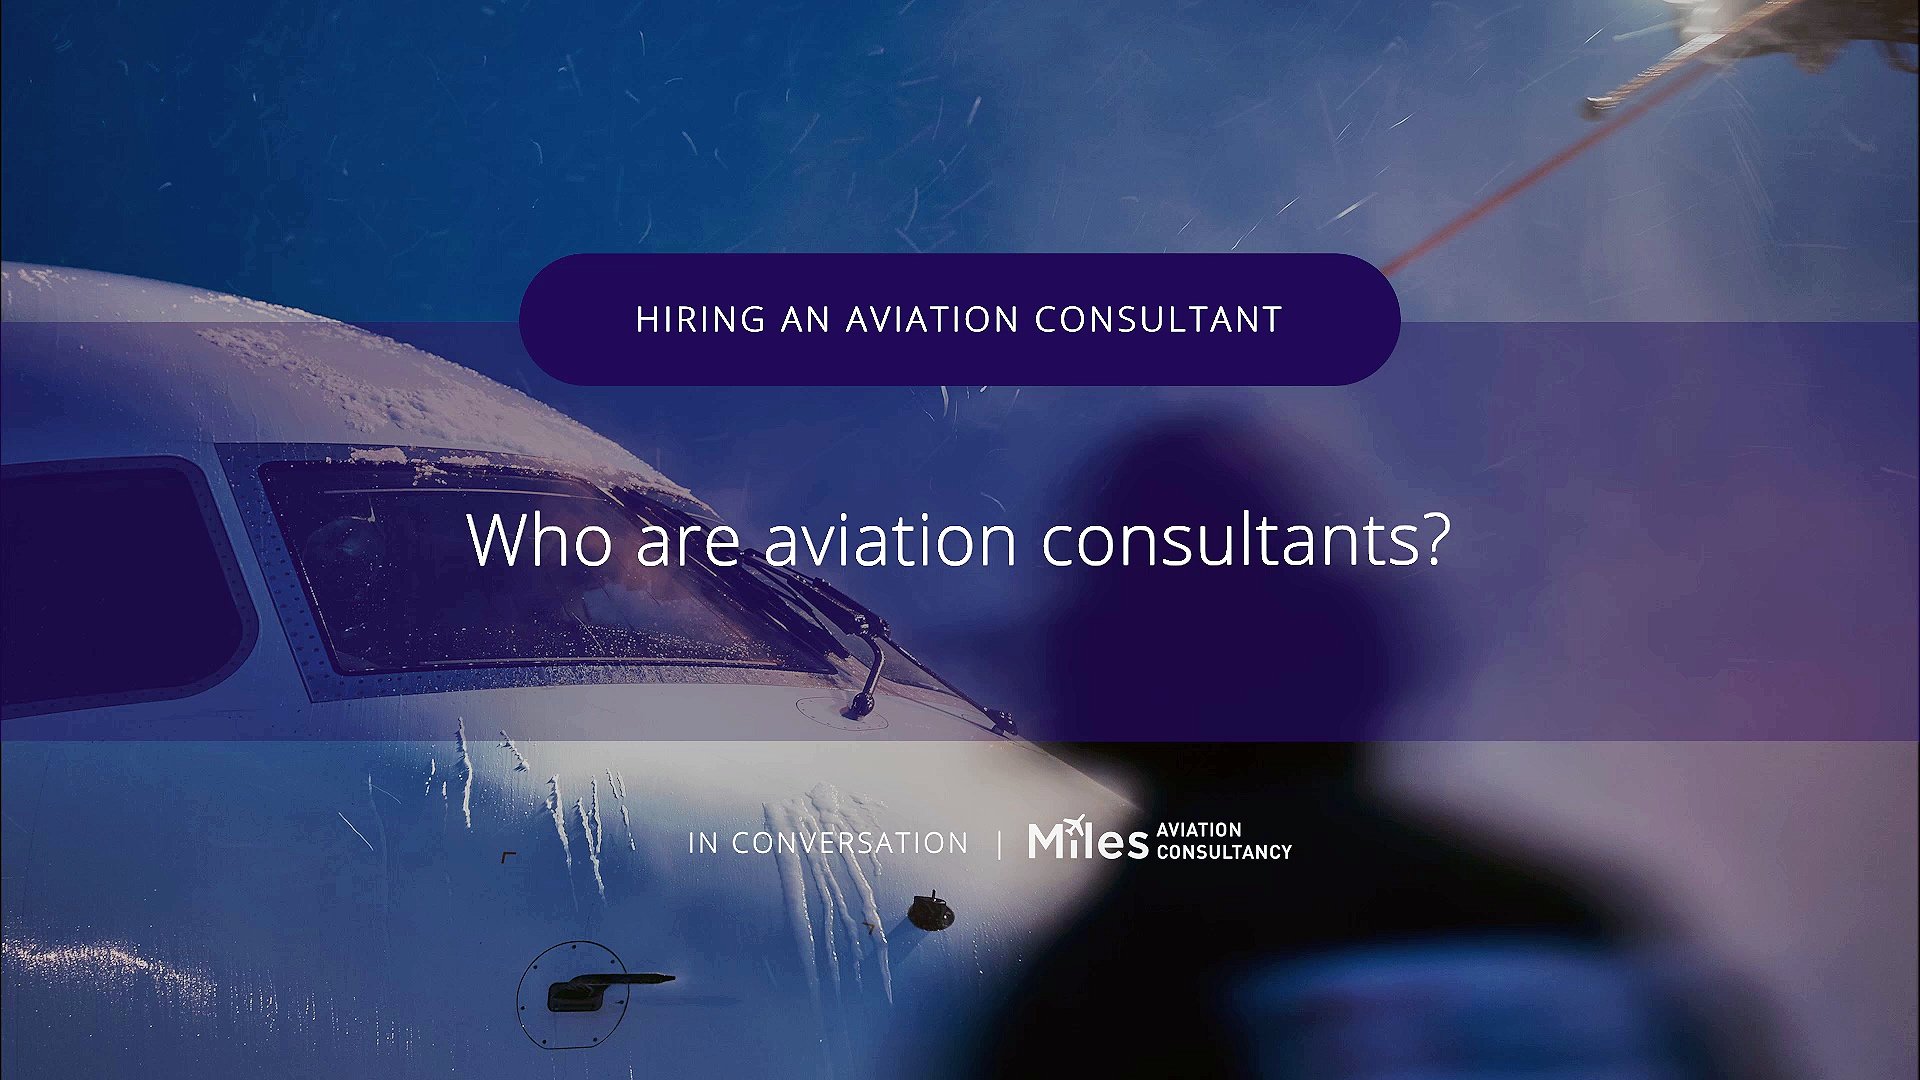 Hiring aviation consultants and what they can do for you